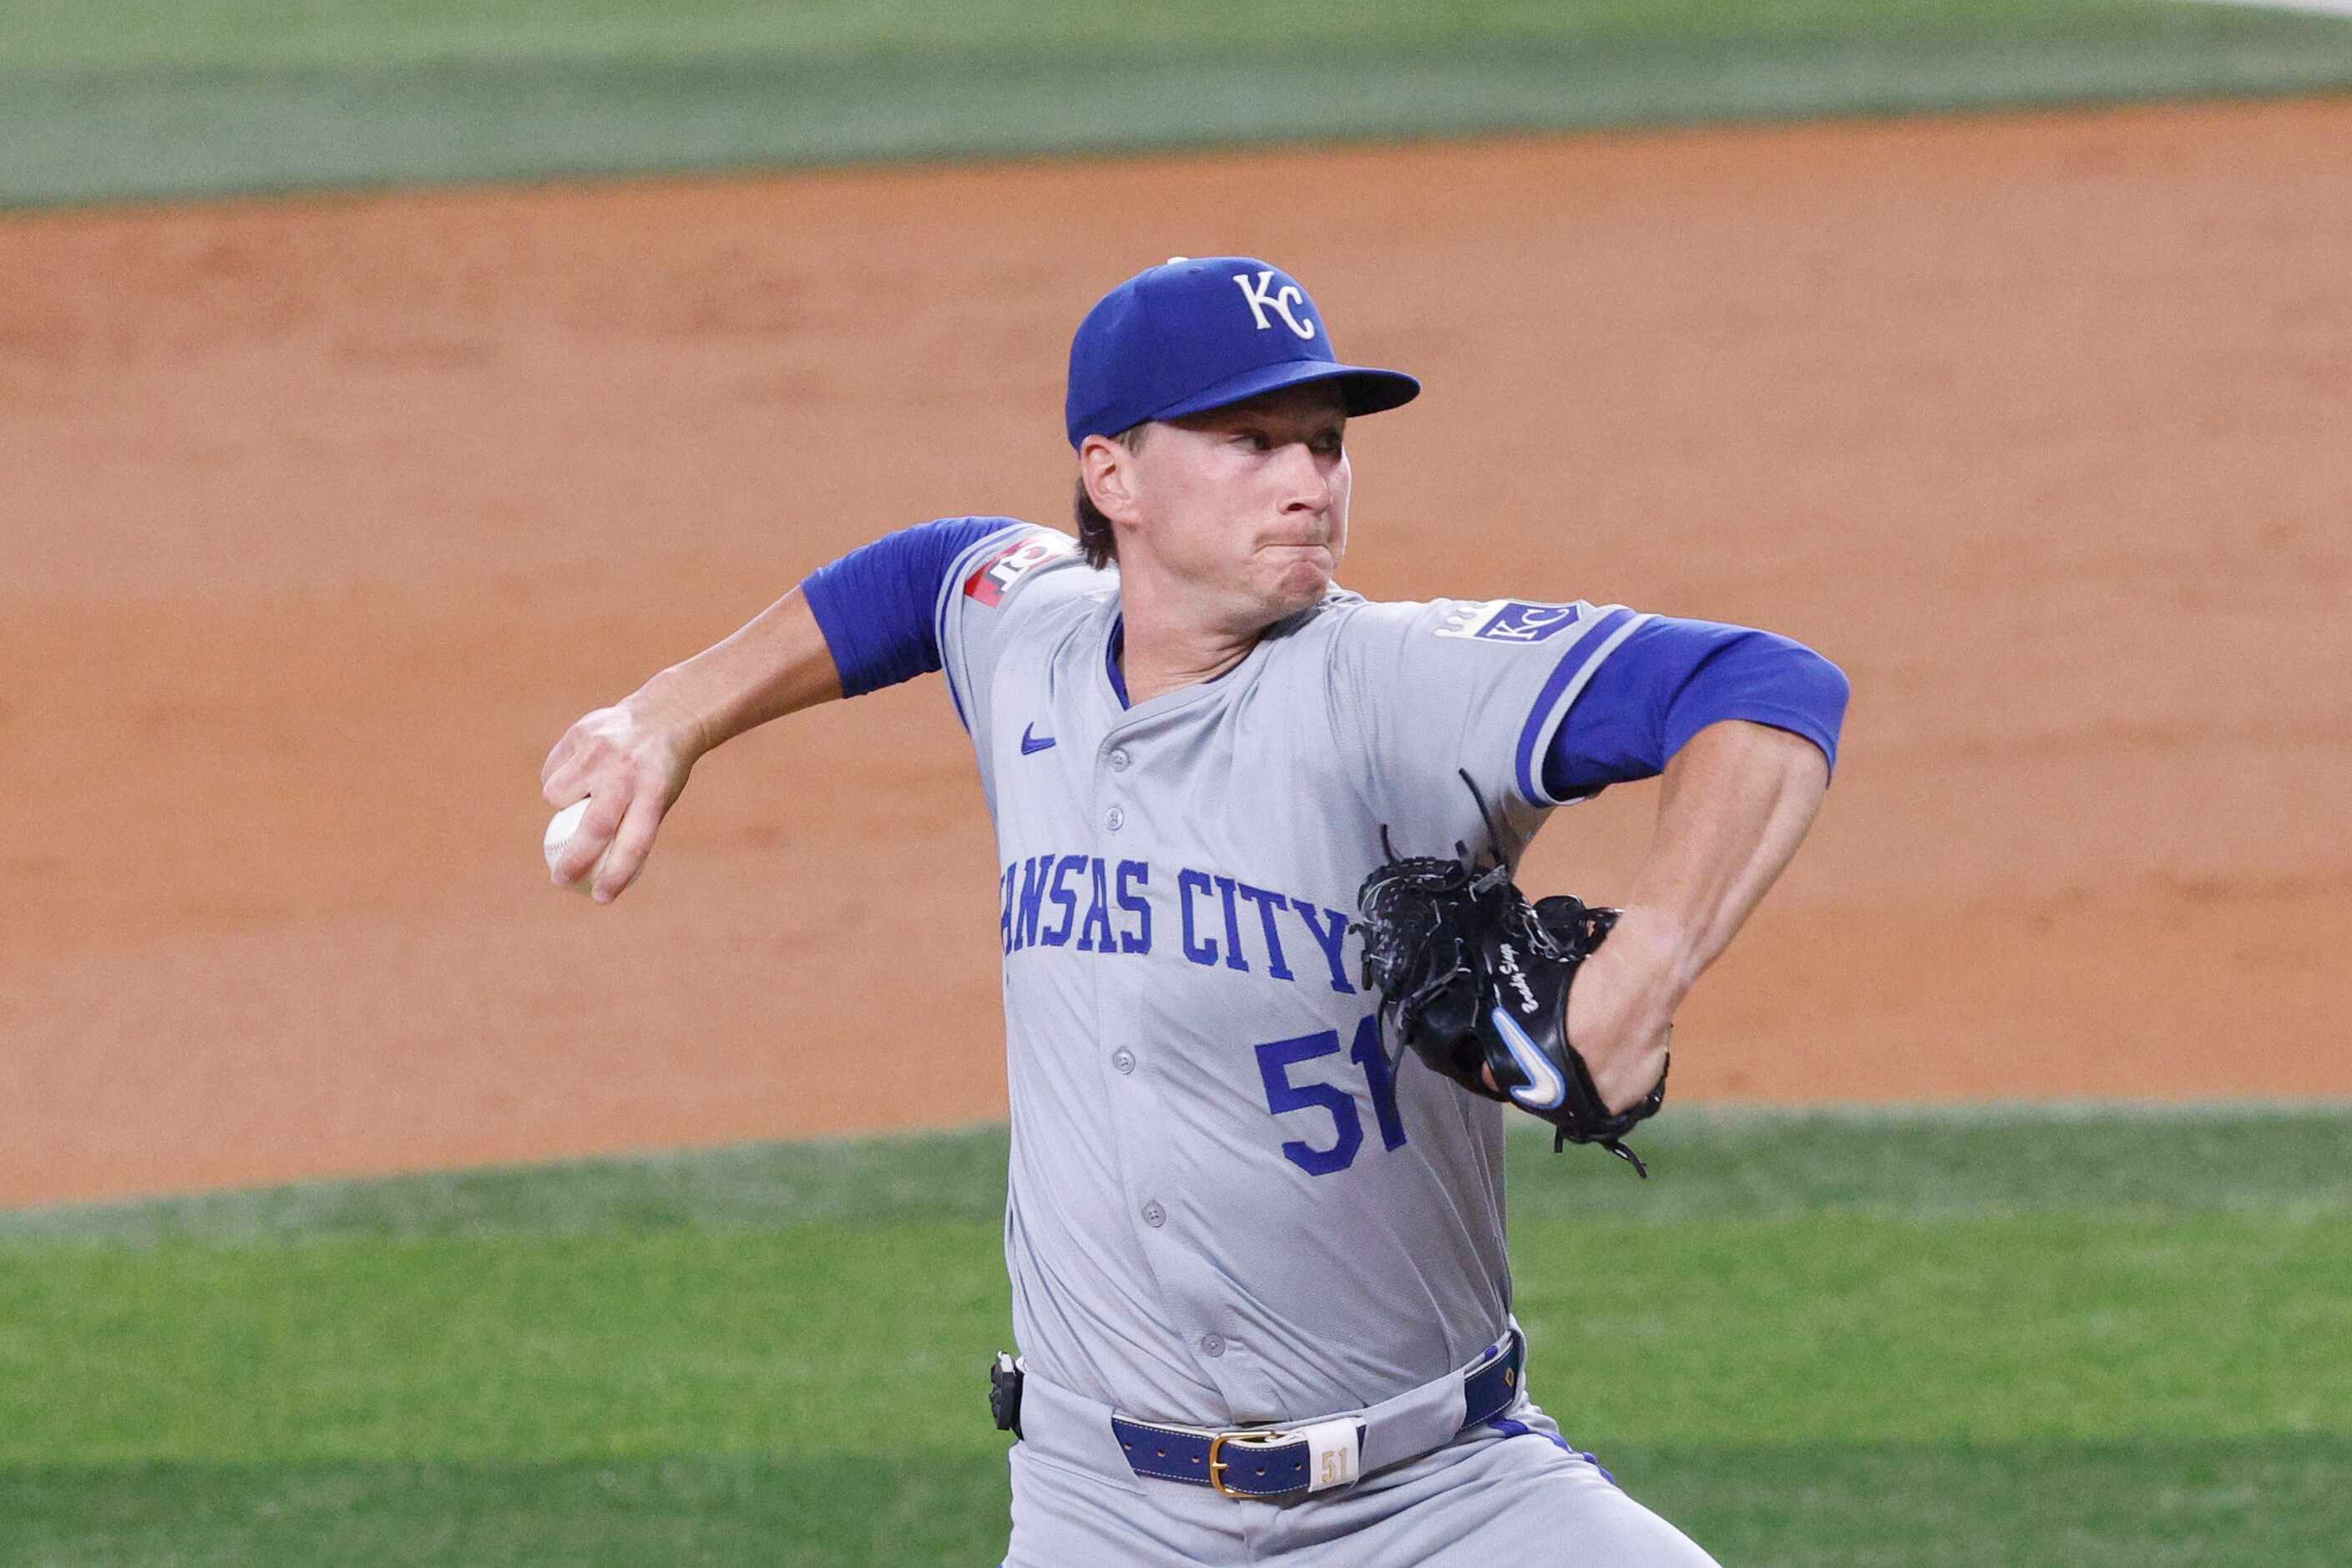 Kansas City Royals pitcher Brady Singer (51) delivers during the second inning of a baseball...